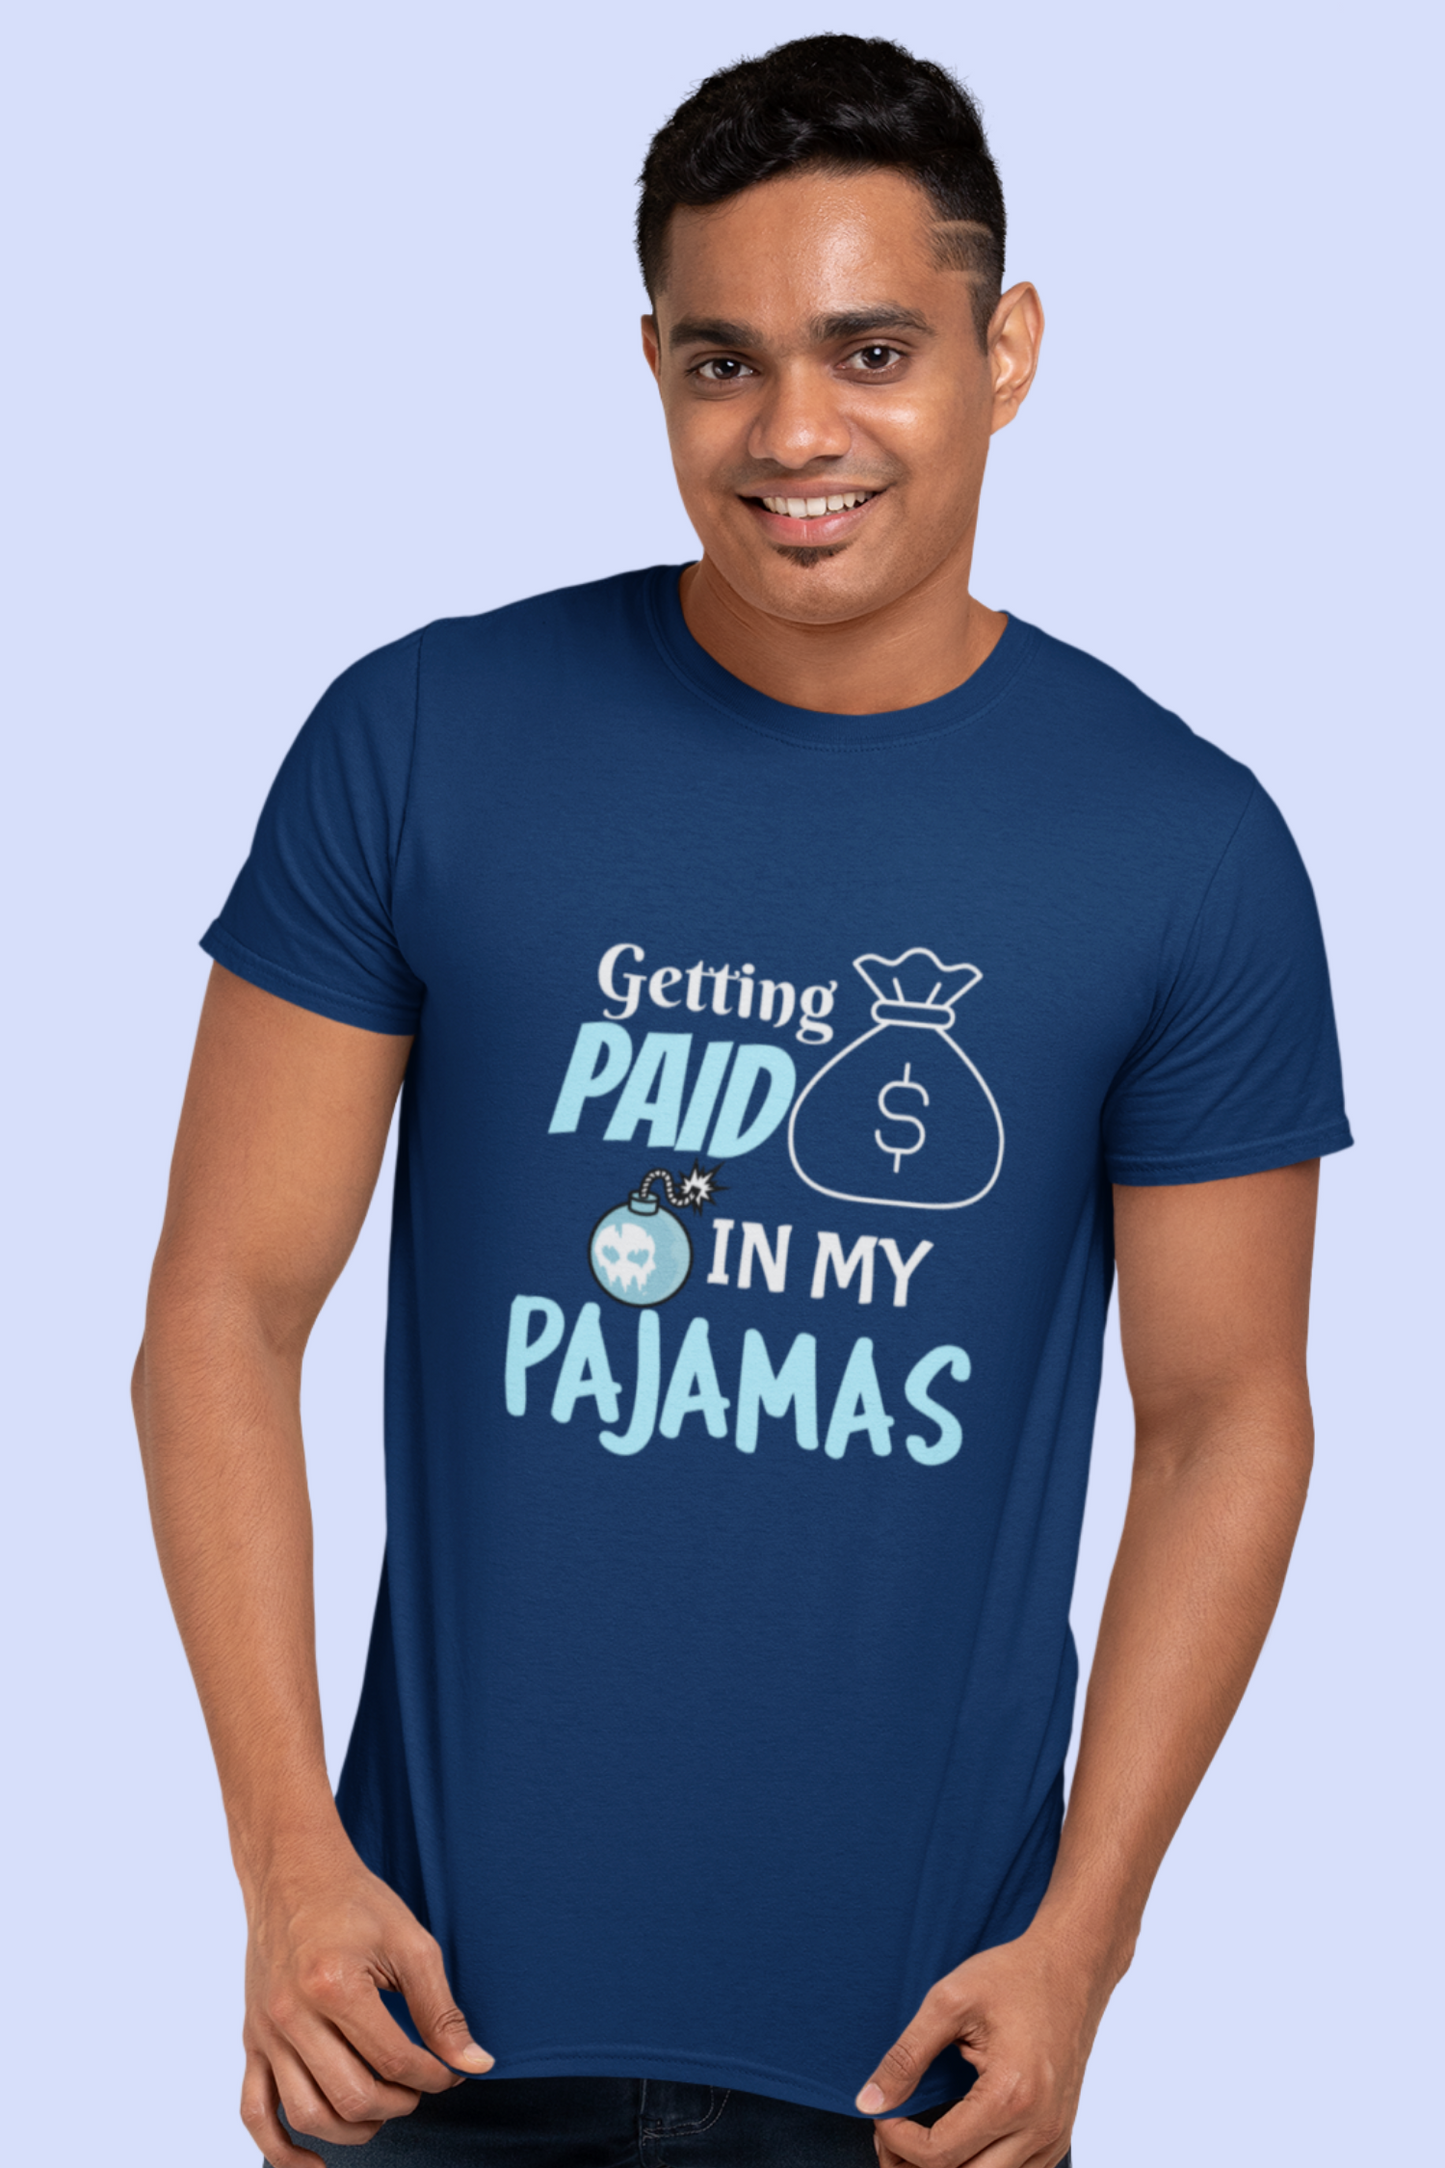 Getting Paid In My Pajamas funny quote men's t shirt online in India